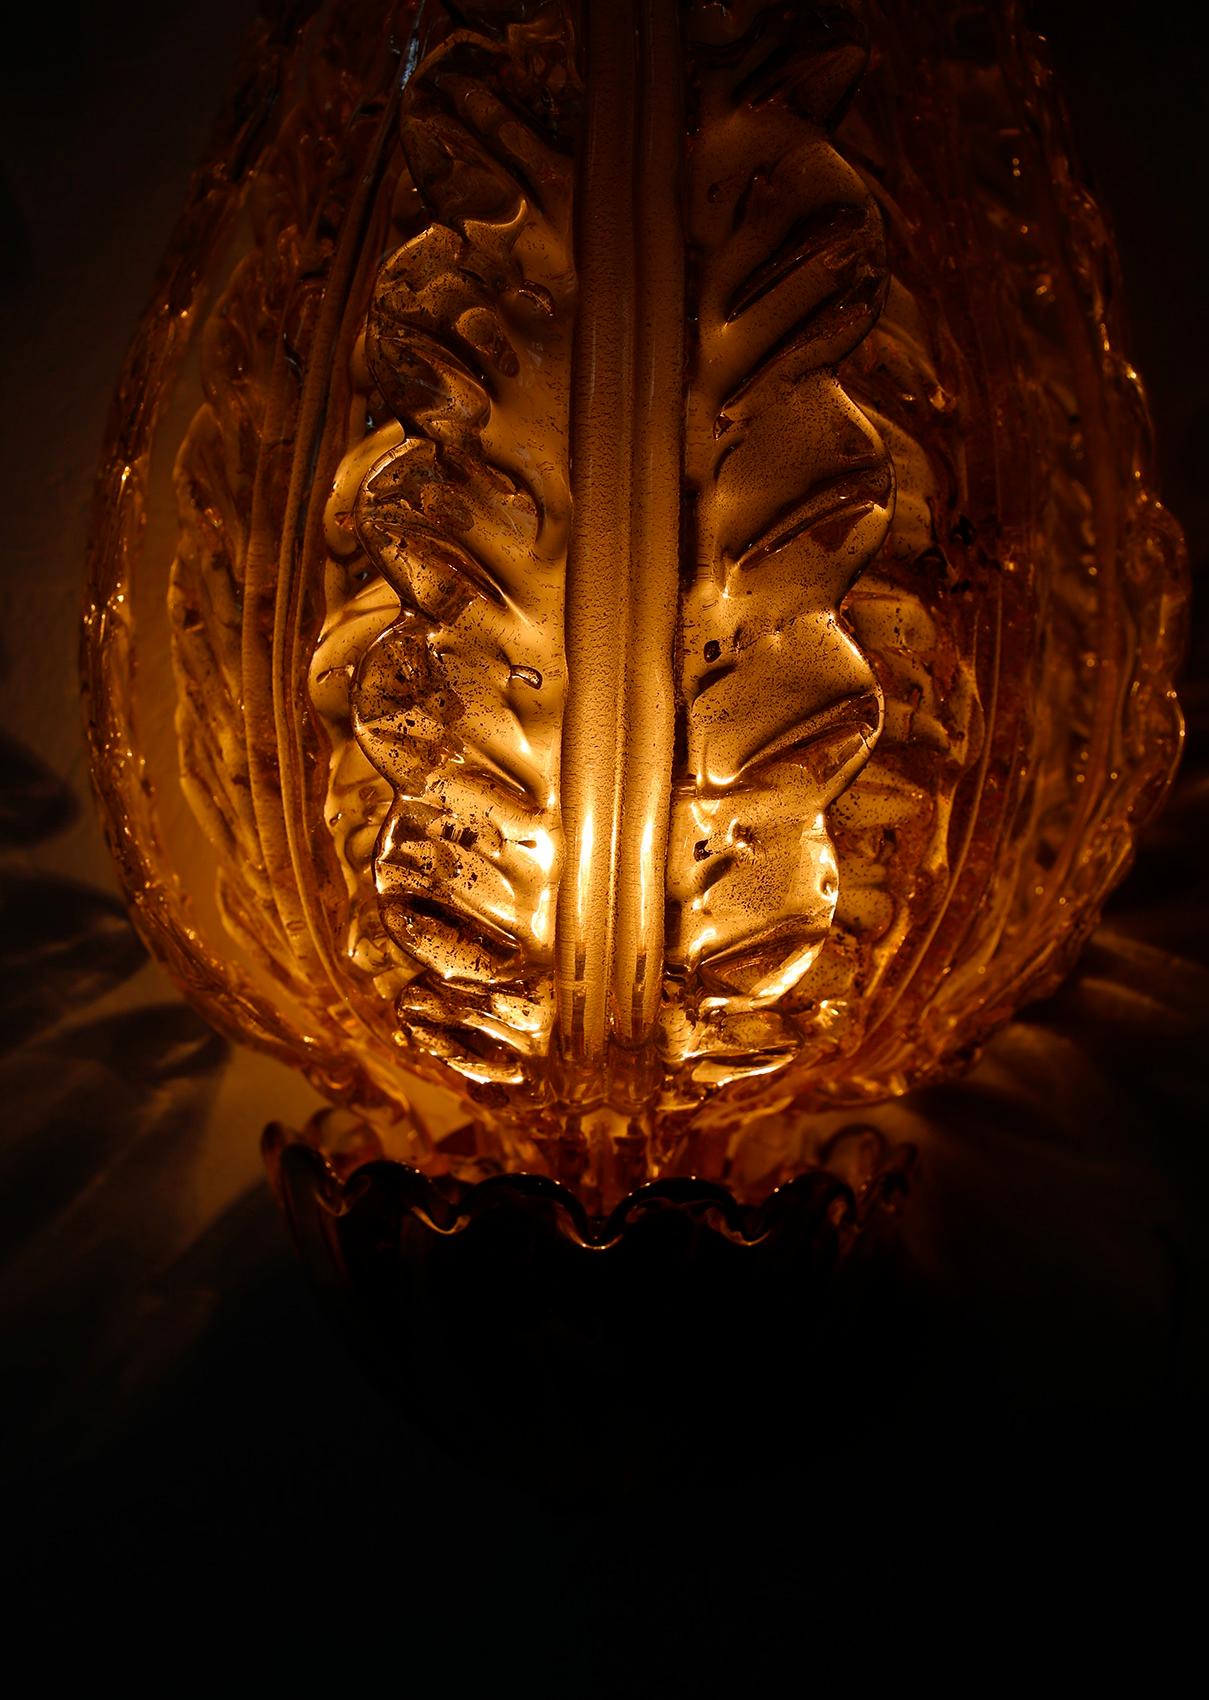 Mid-20th Century Venini Wall Lamp in Murano Glass Gold and Brass with Three Leaves, from 1930s